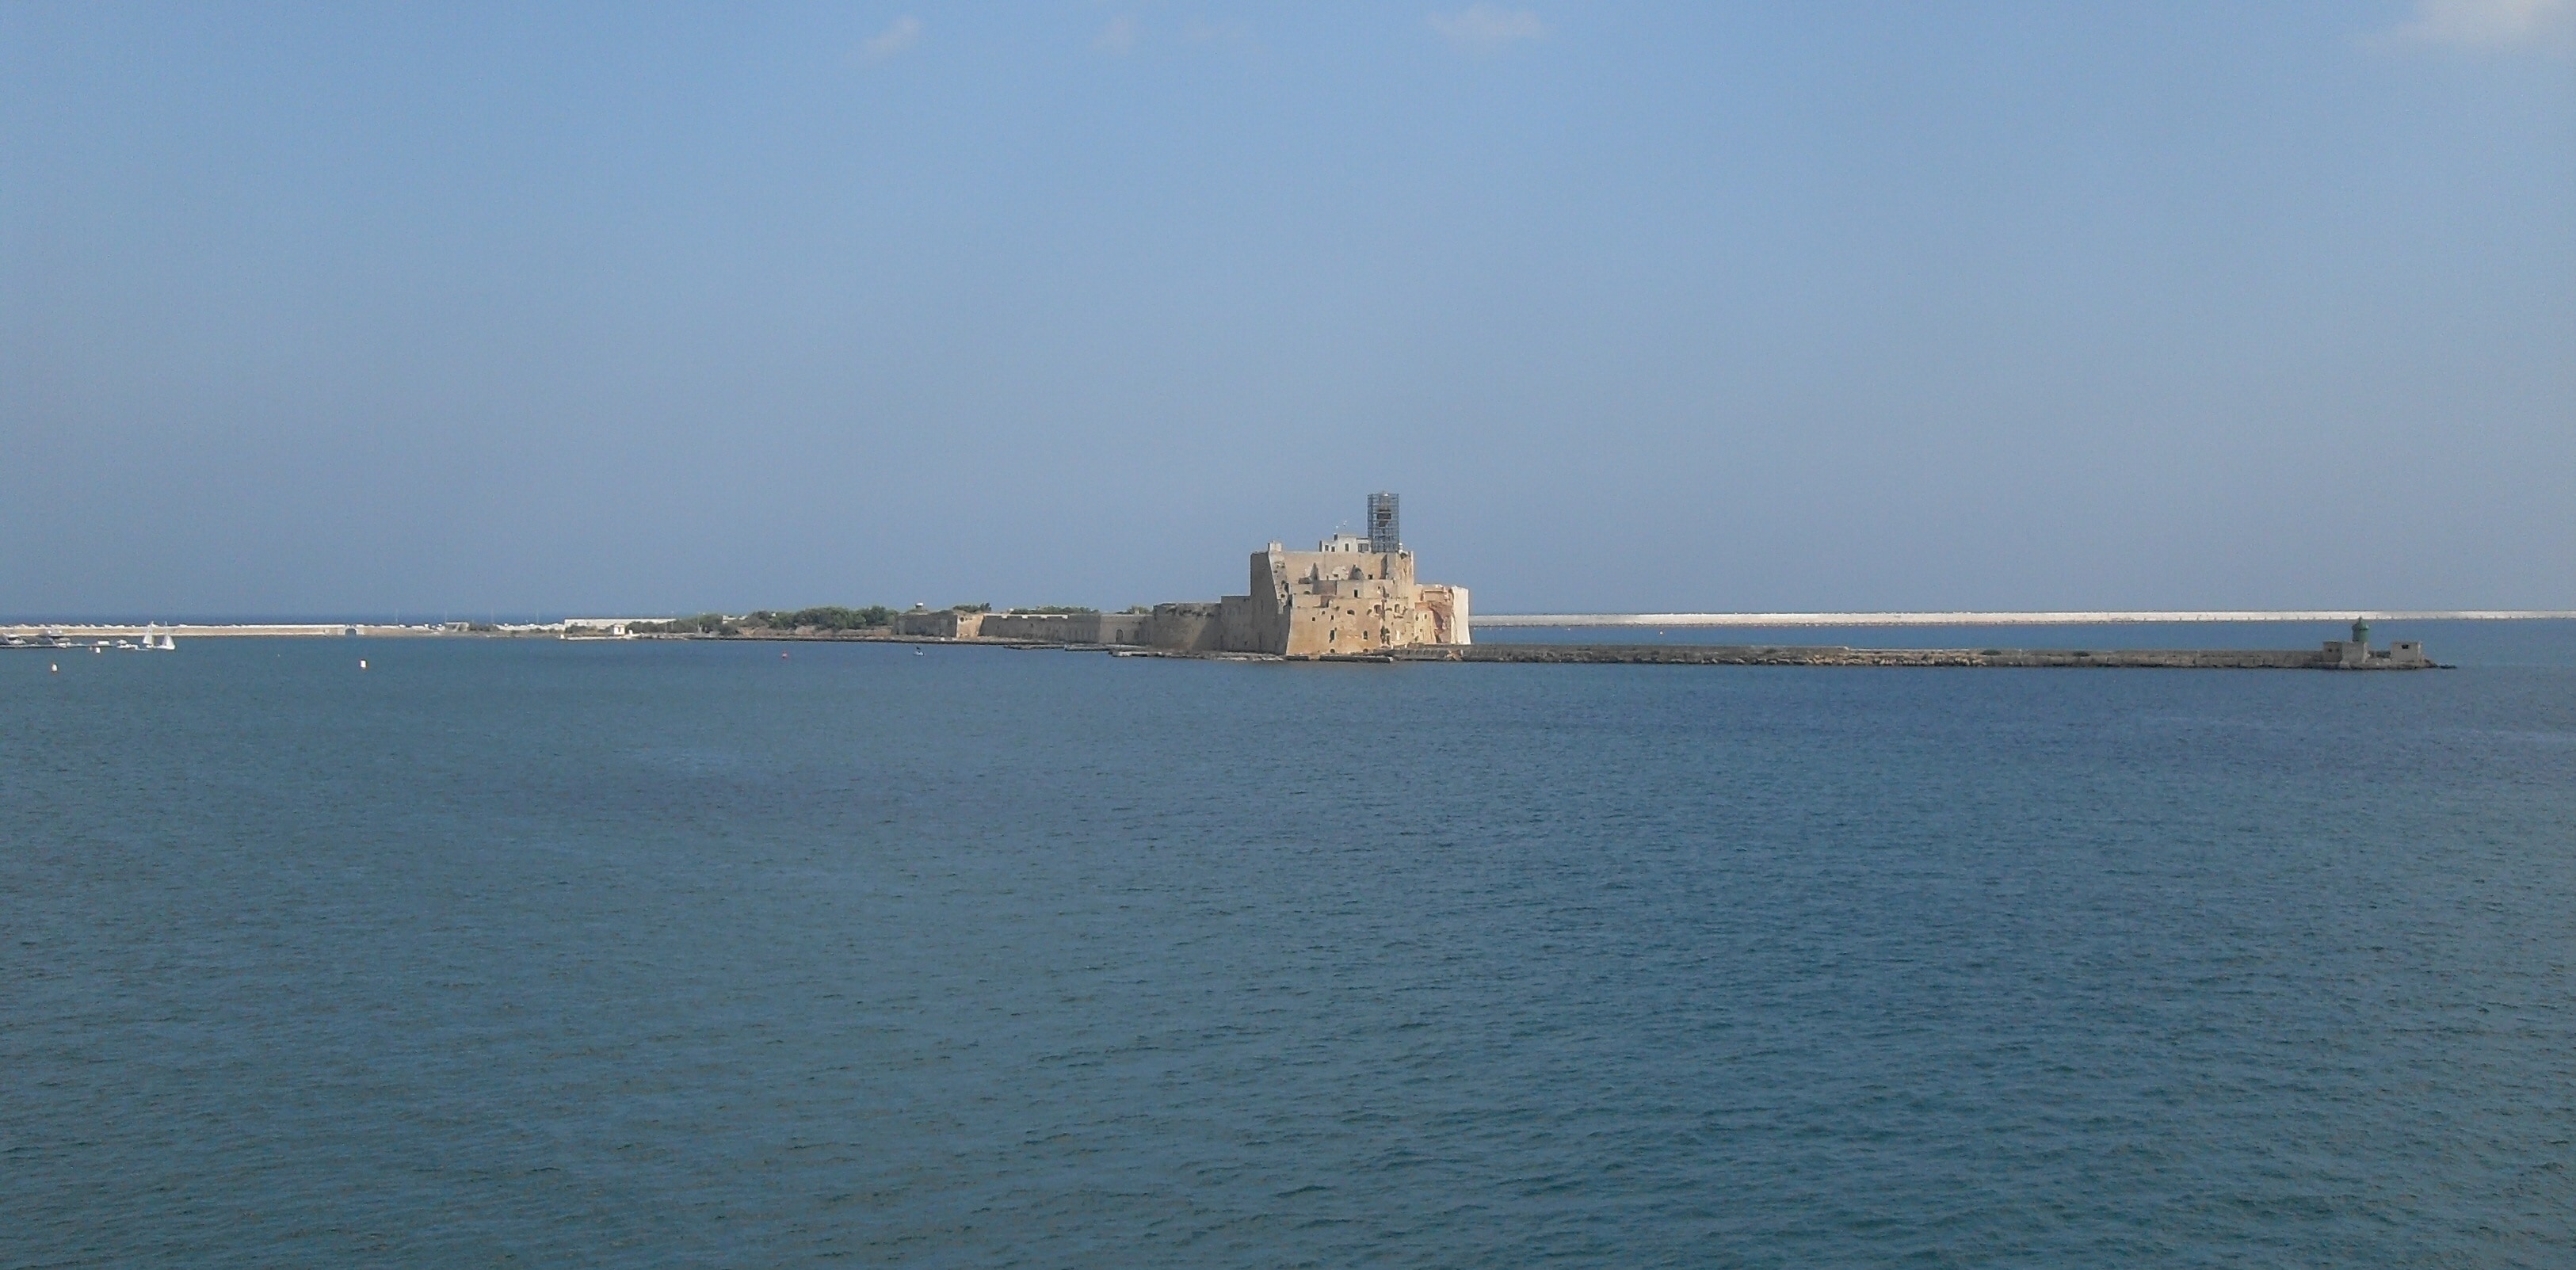 Old pier in the port of Brindisi, Italy